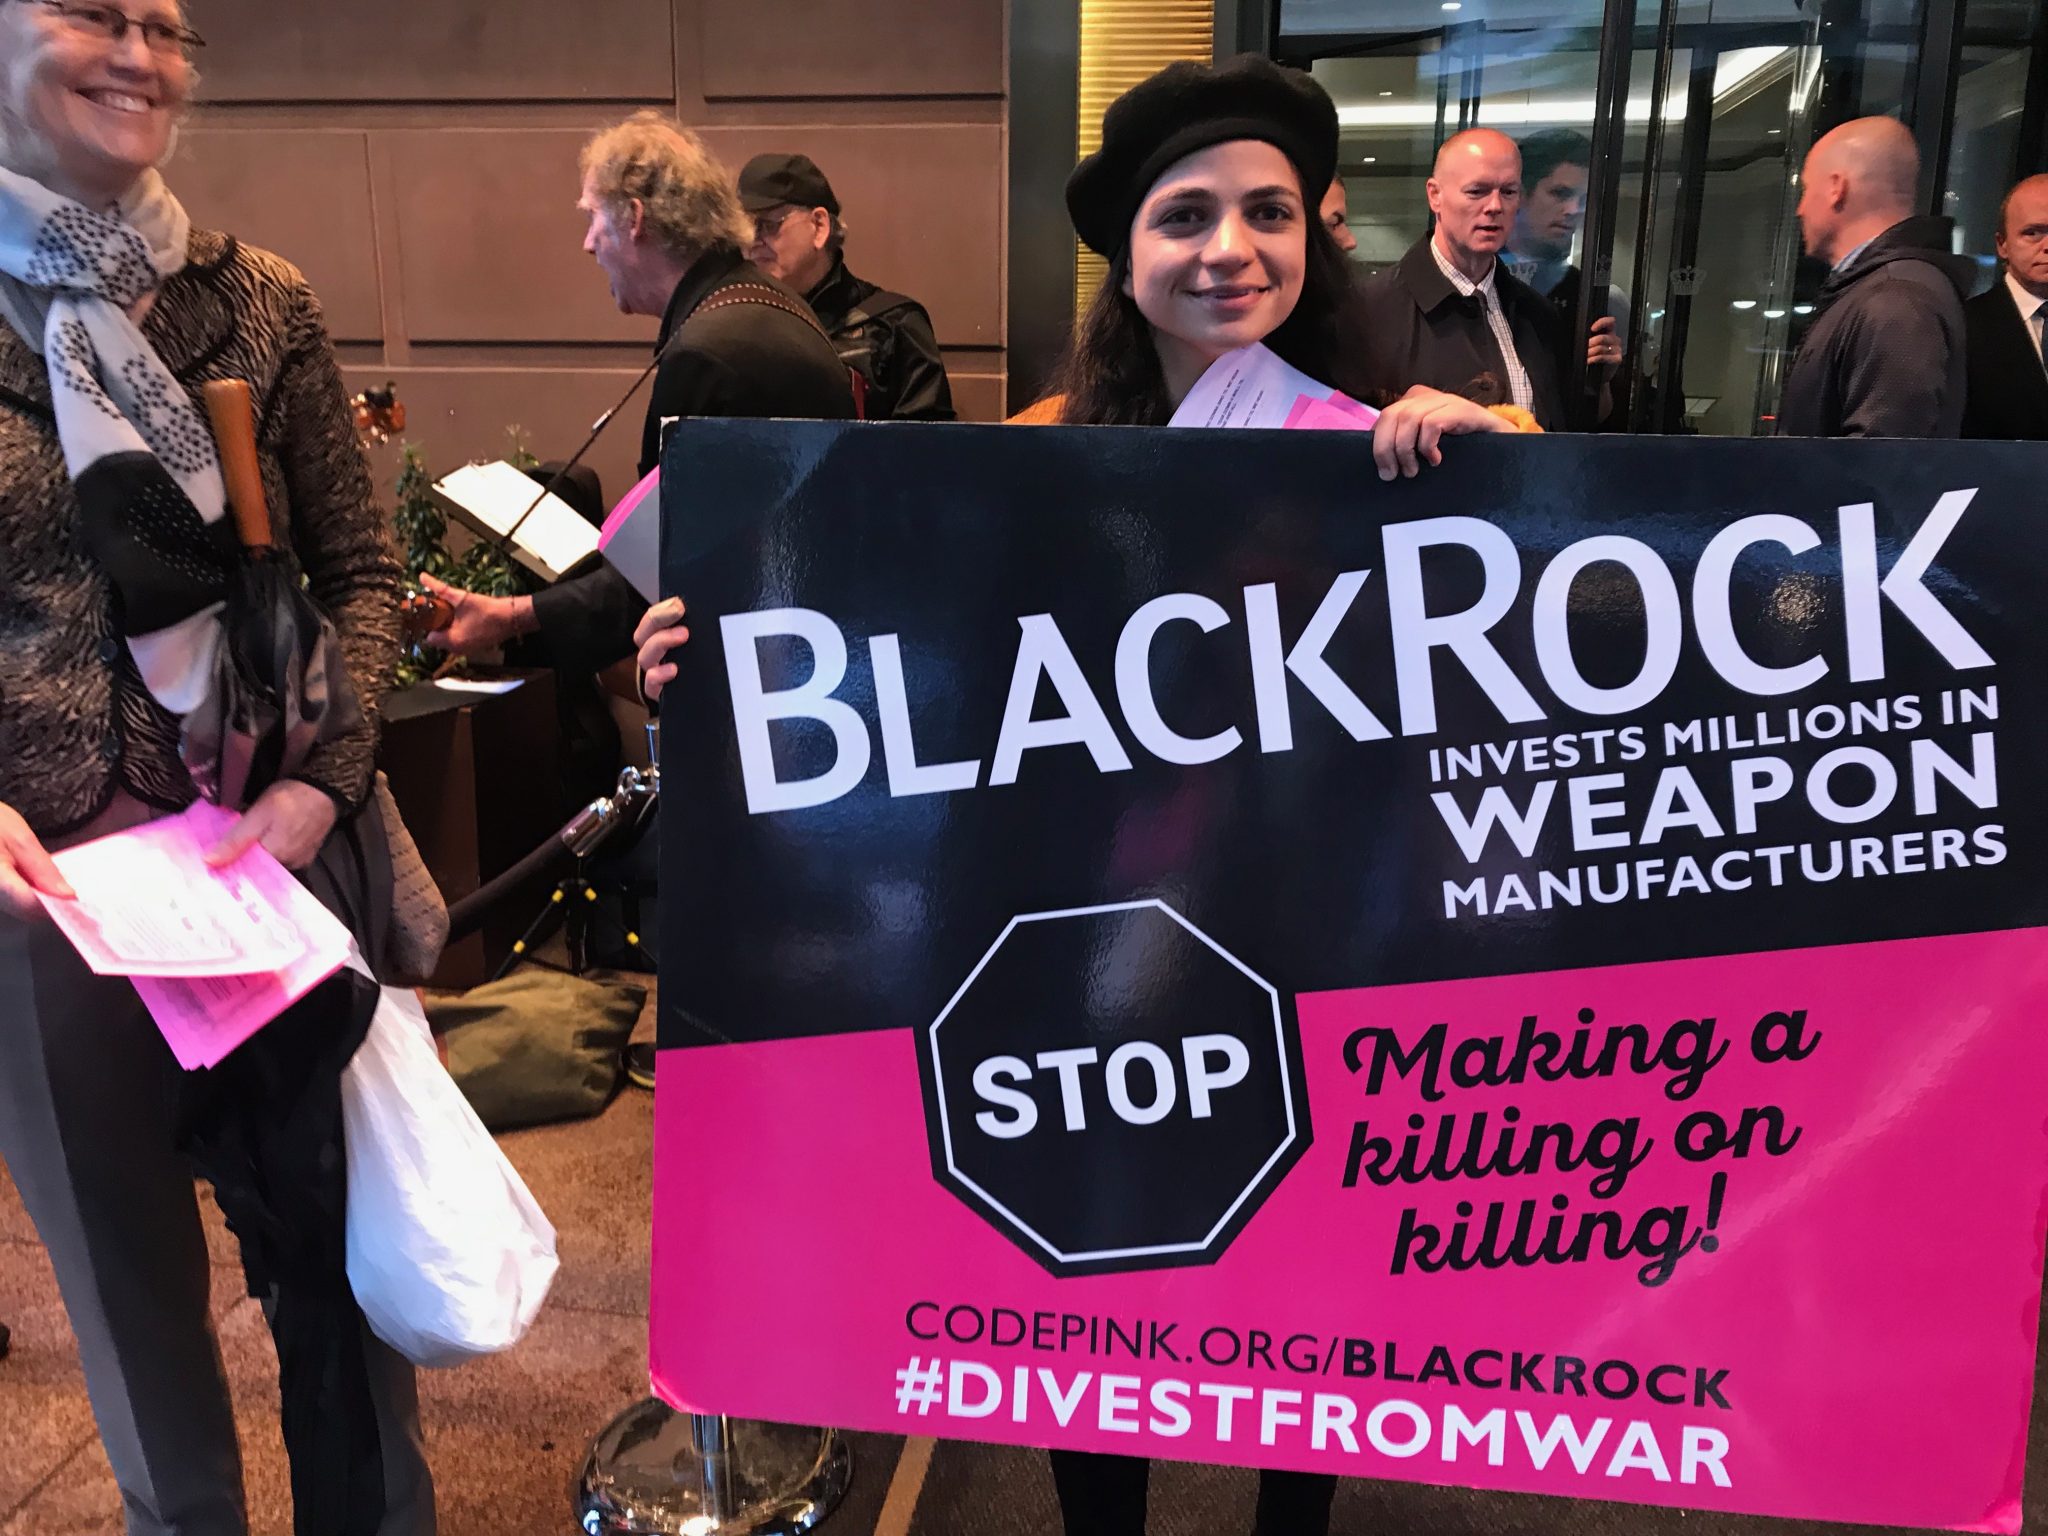 A protester holding a placard saying U.S. war machine: real threat to  peace at a rally against war with Russia sponsored by multiple groups  including CODEPINK: Women for Peace, Black Alliance for